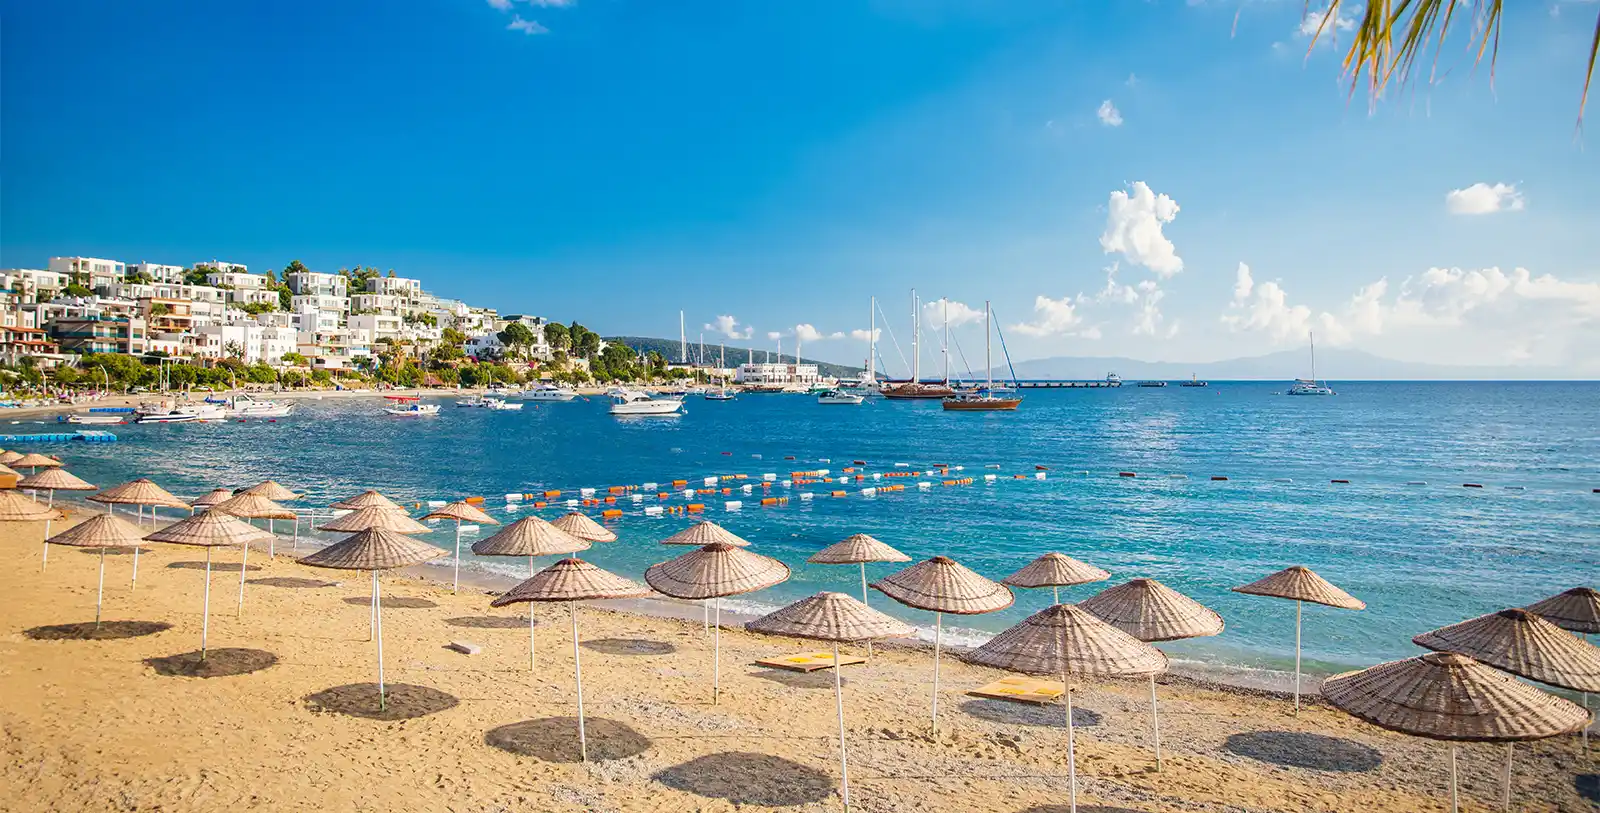 Bodrum is famous for its beautiful beaches. A sand beach in Bodrum.